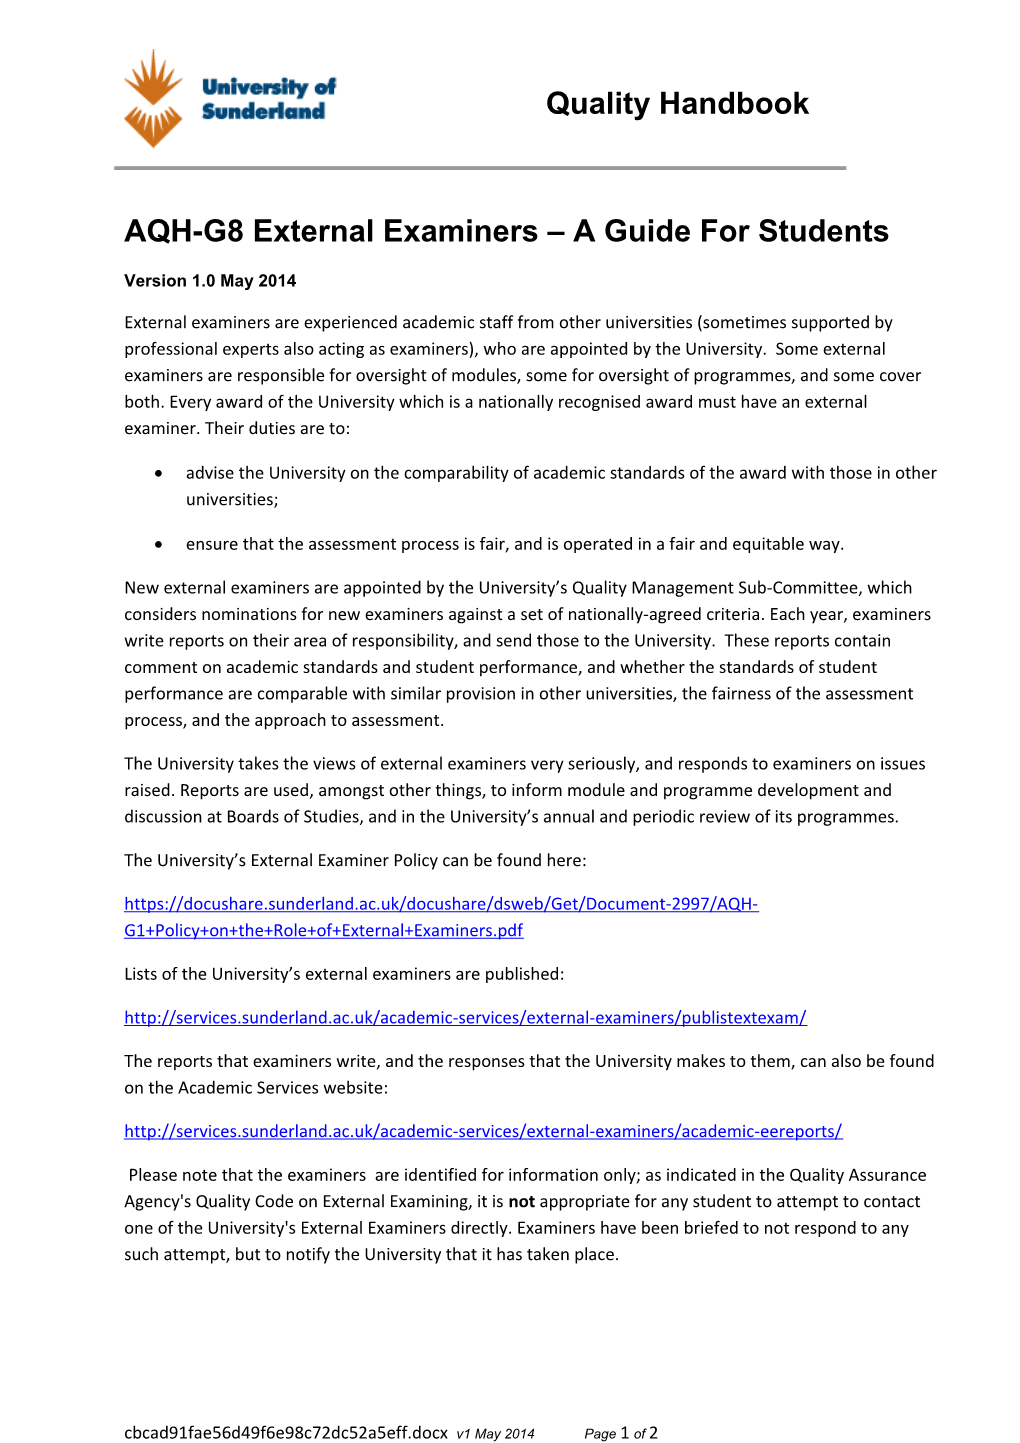 AQH-G8 External Examiners a Guide for Students